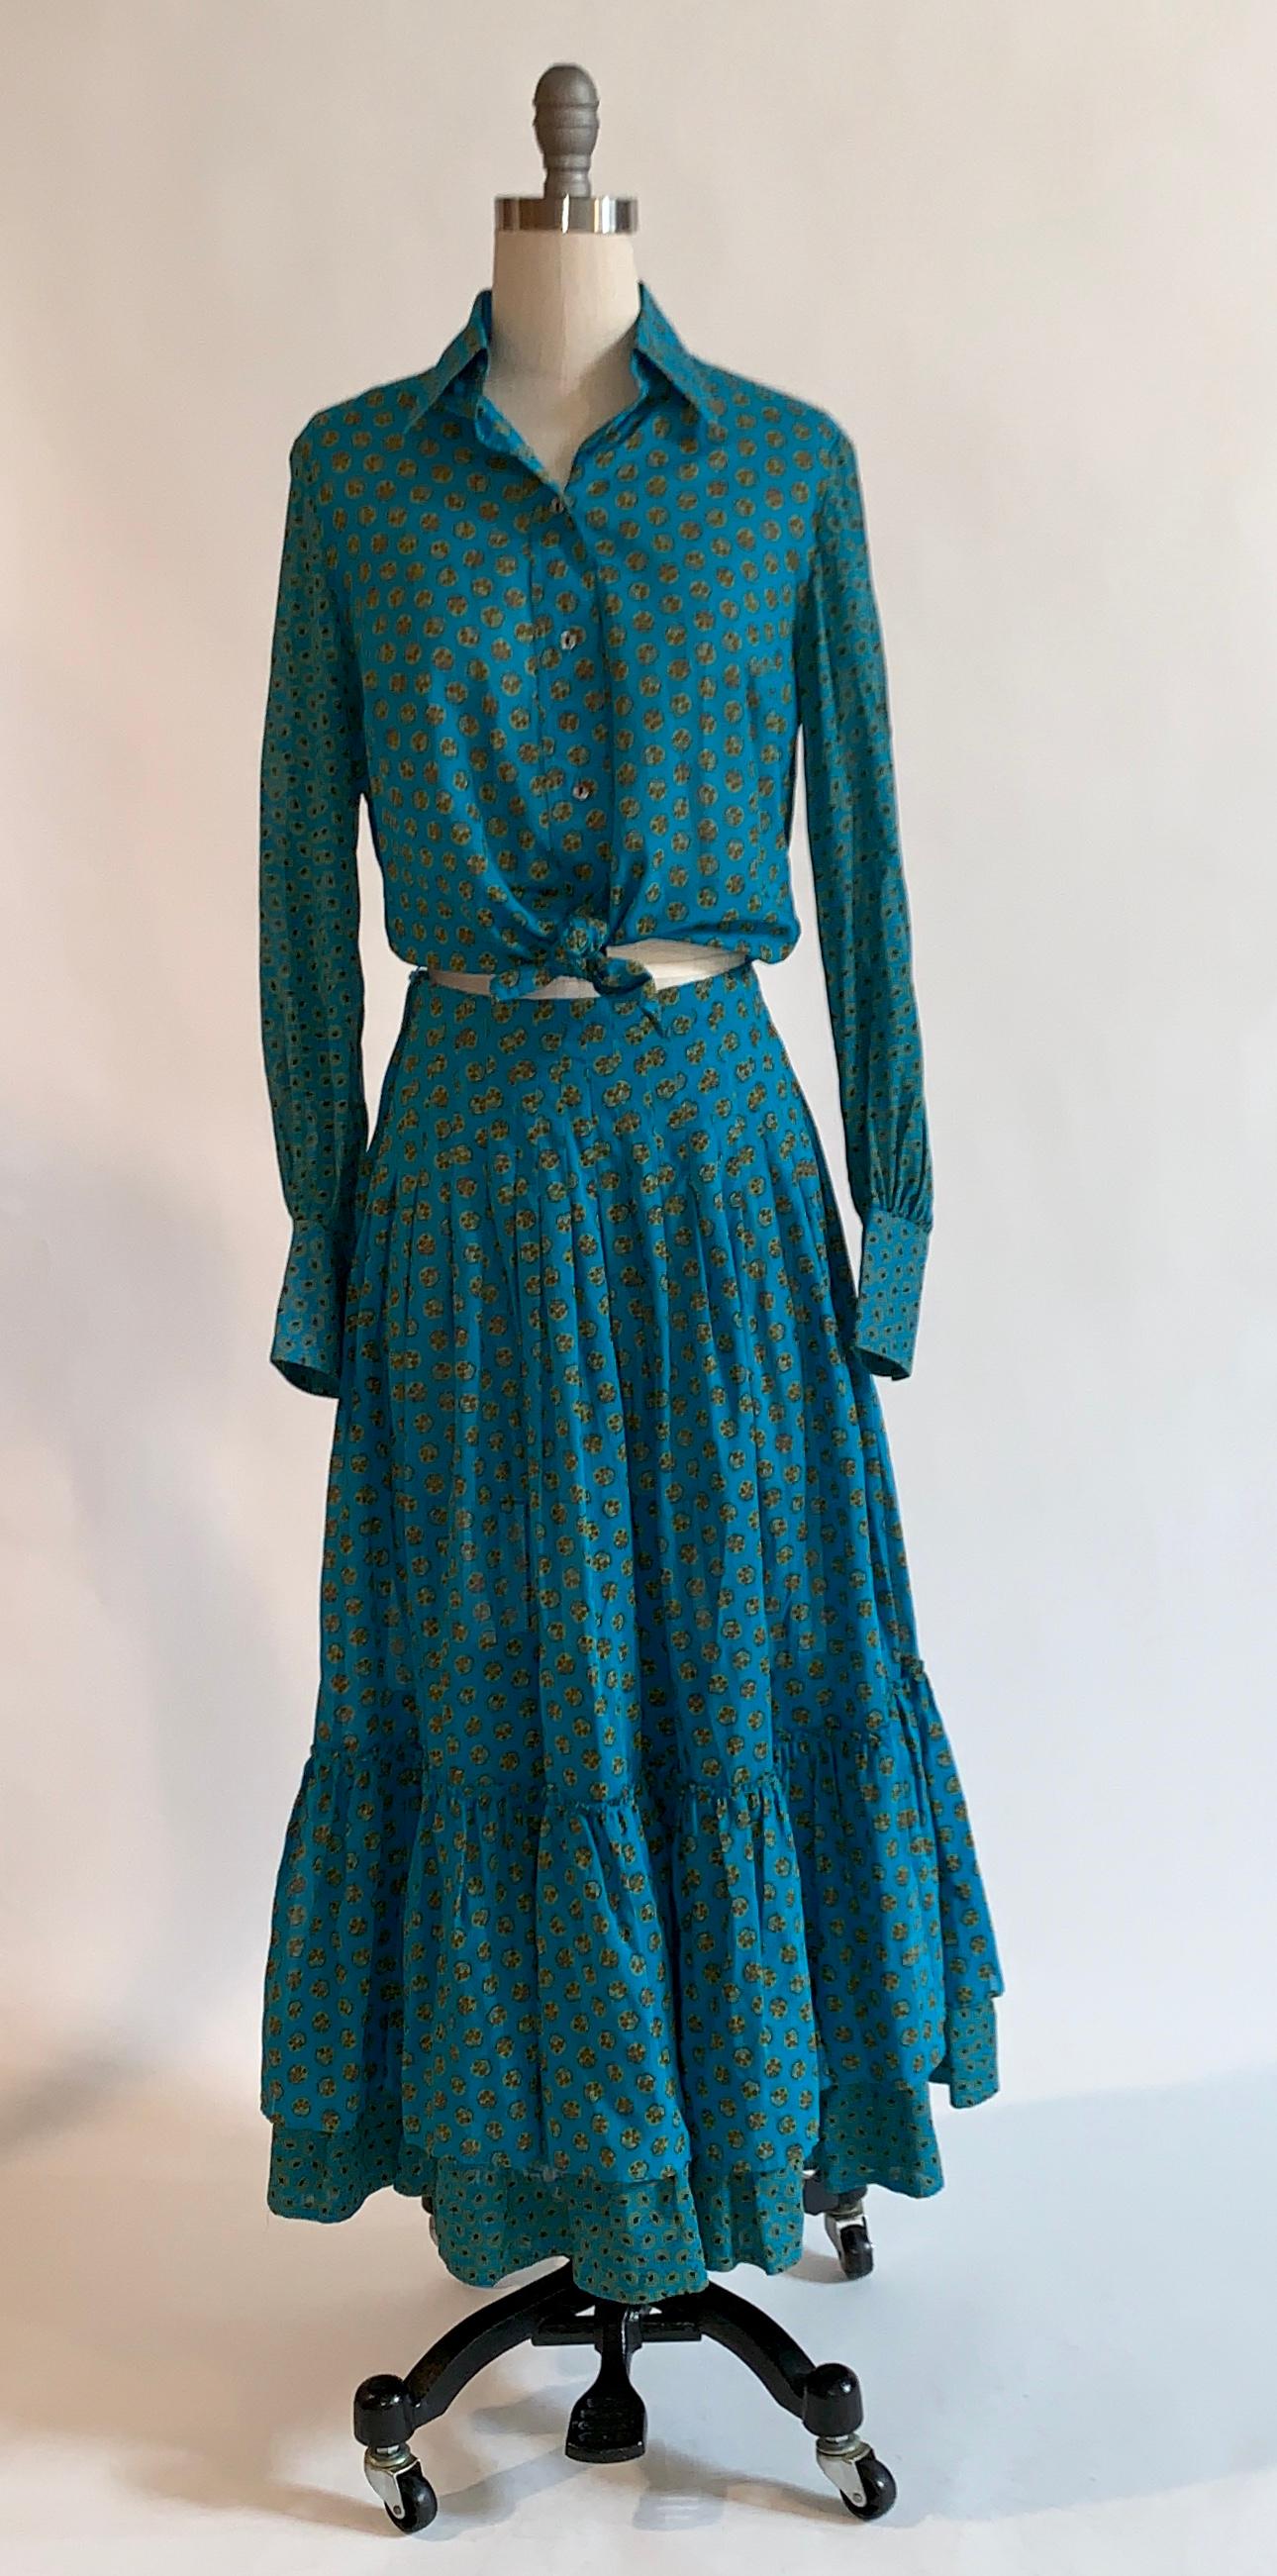 Vintage 1970s Yves Saint Laurent Rive Gauche blue print prairie style skirt with tiered ruffle hem and matching button up blouse. Fabric is slightly sheer. Collared blouse buttons at front and cuffs. Skirt fastens with side zip and hook.   

100%